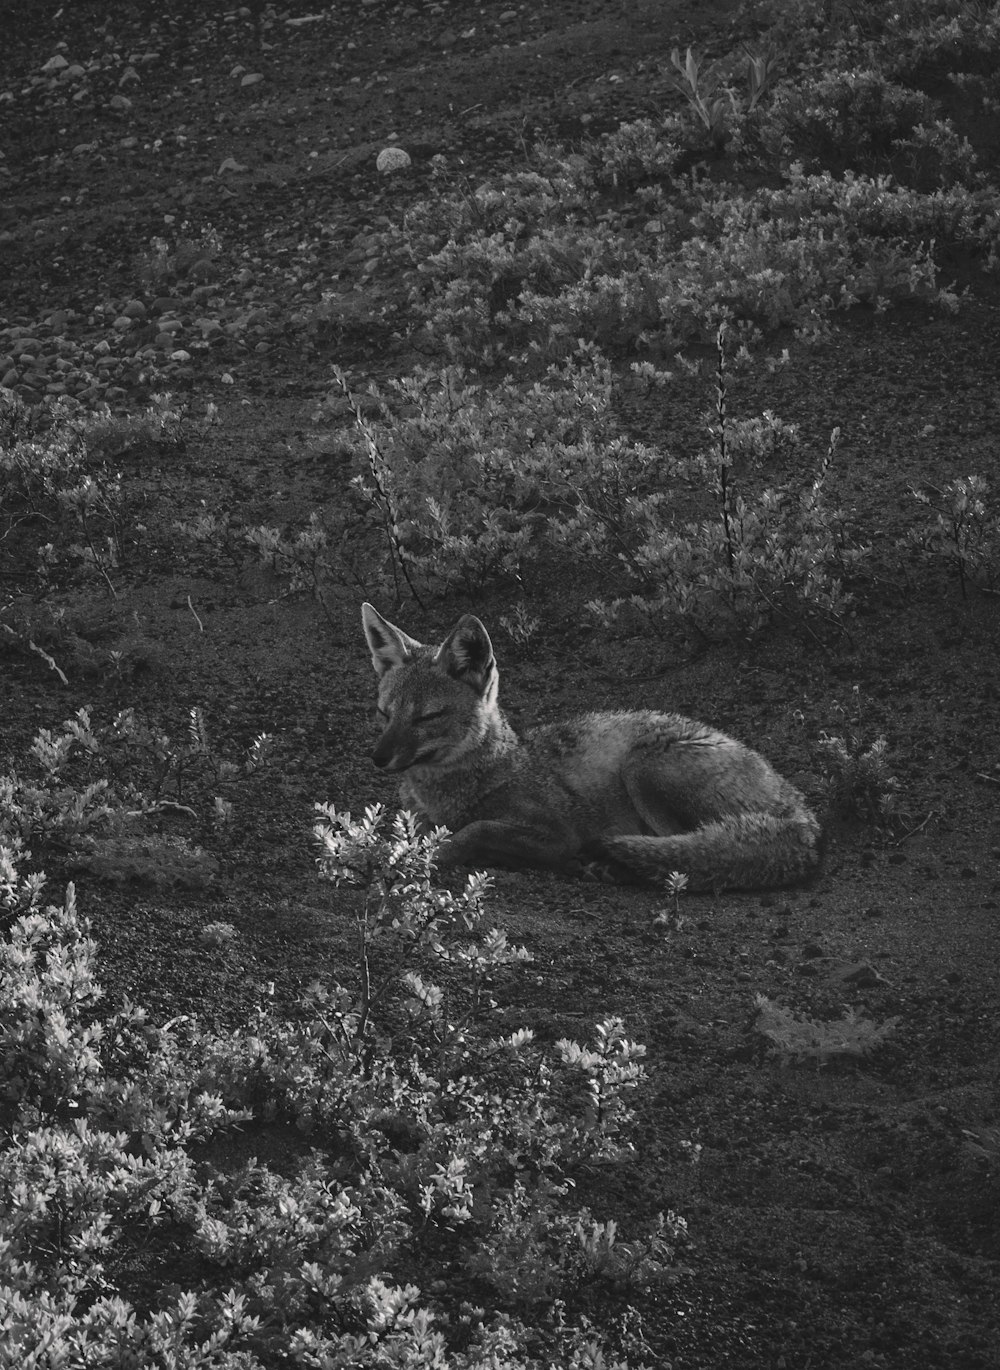 fox on grass field in grayscale photography